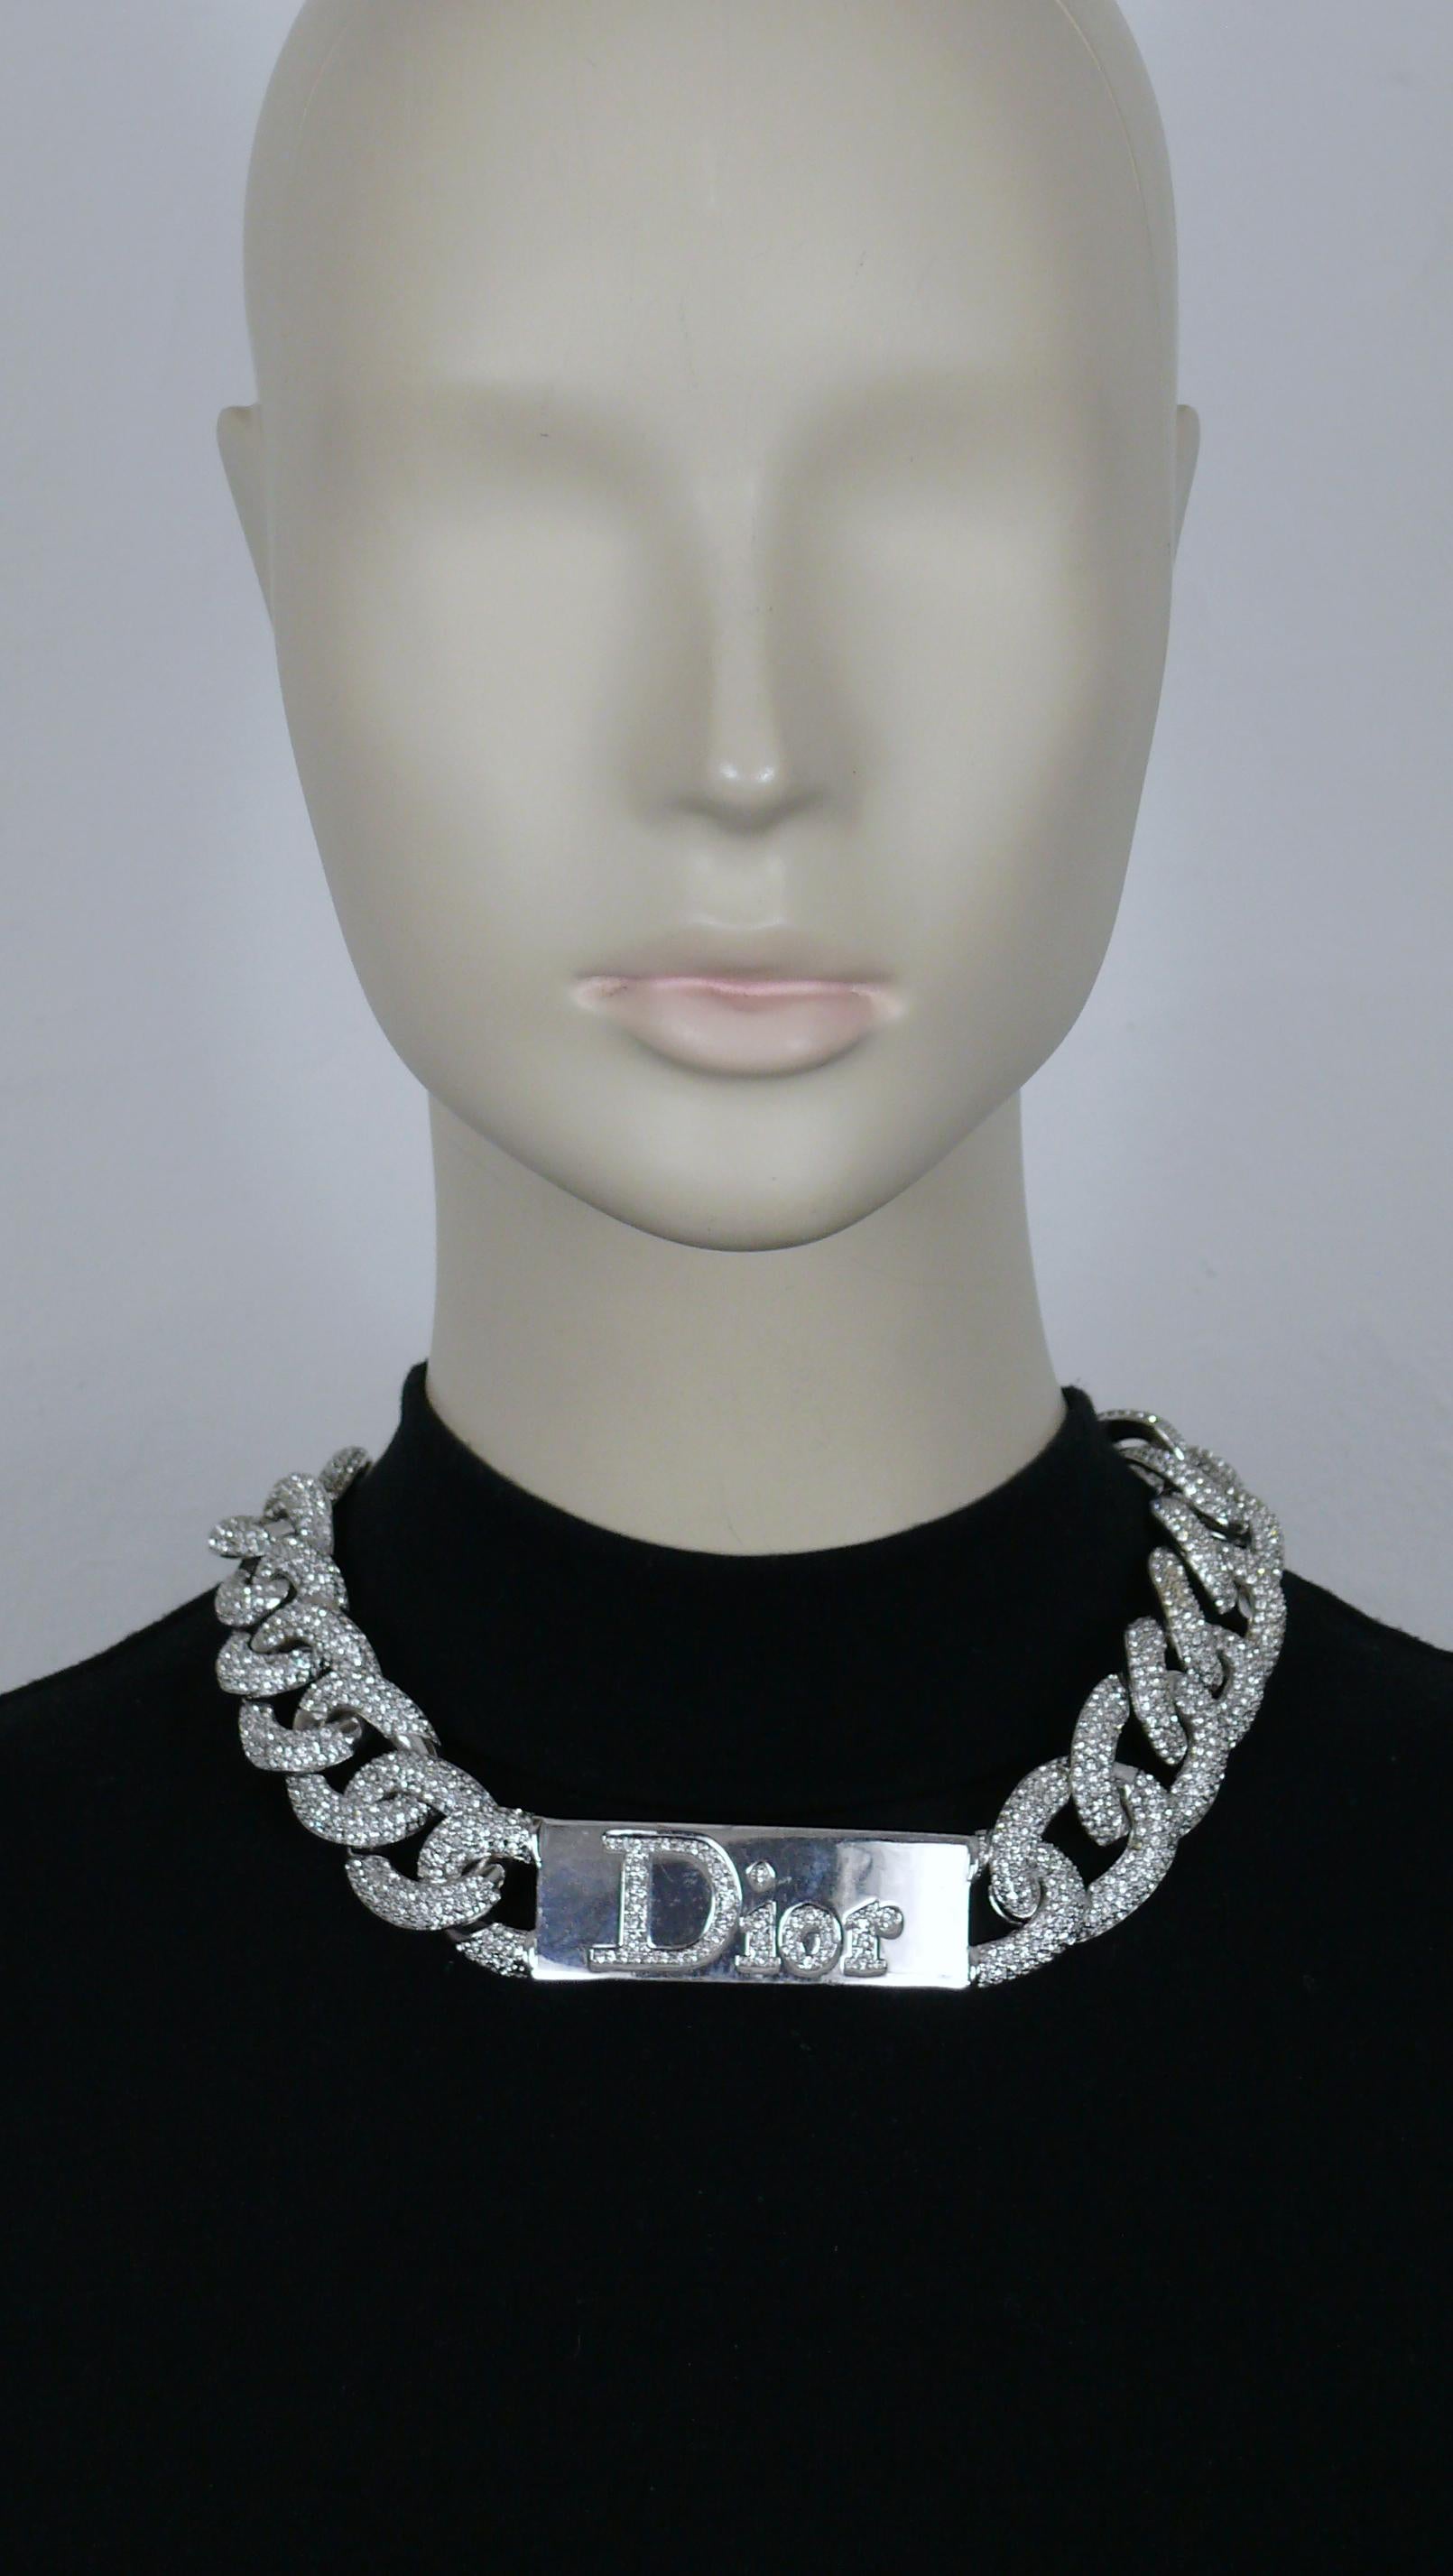 CHRISTIAN DIOR by JOHN GALLIANO chunky silver tone curb chain necklace embellished with clear crystals featuring a massive ID tag embossed DIOR.

From the CHRISTIAN DIOR 2000 Fall/Winter Ready-to-Wear Collection.
As seen on the runway.

Hook and